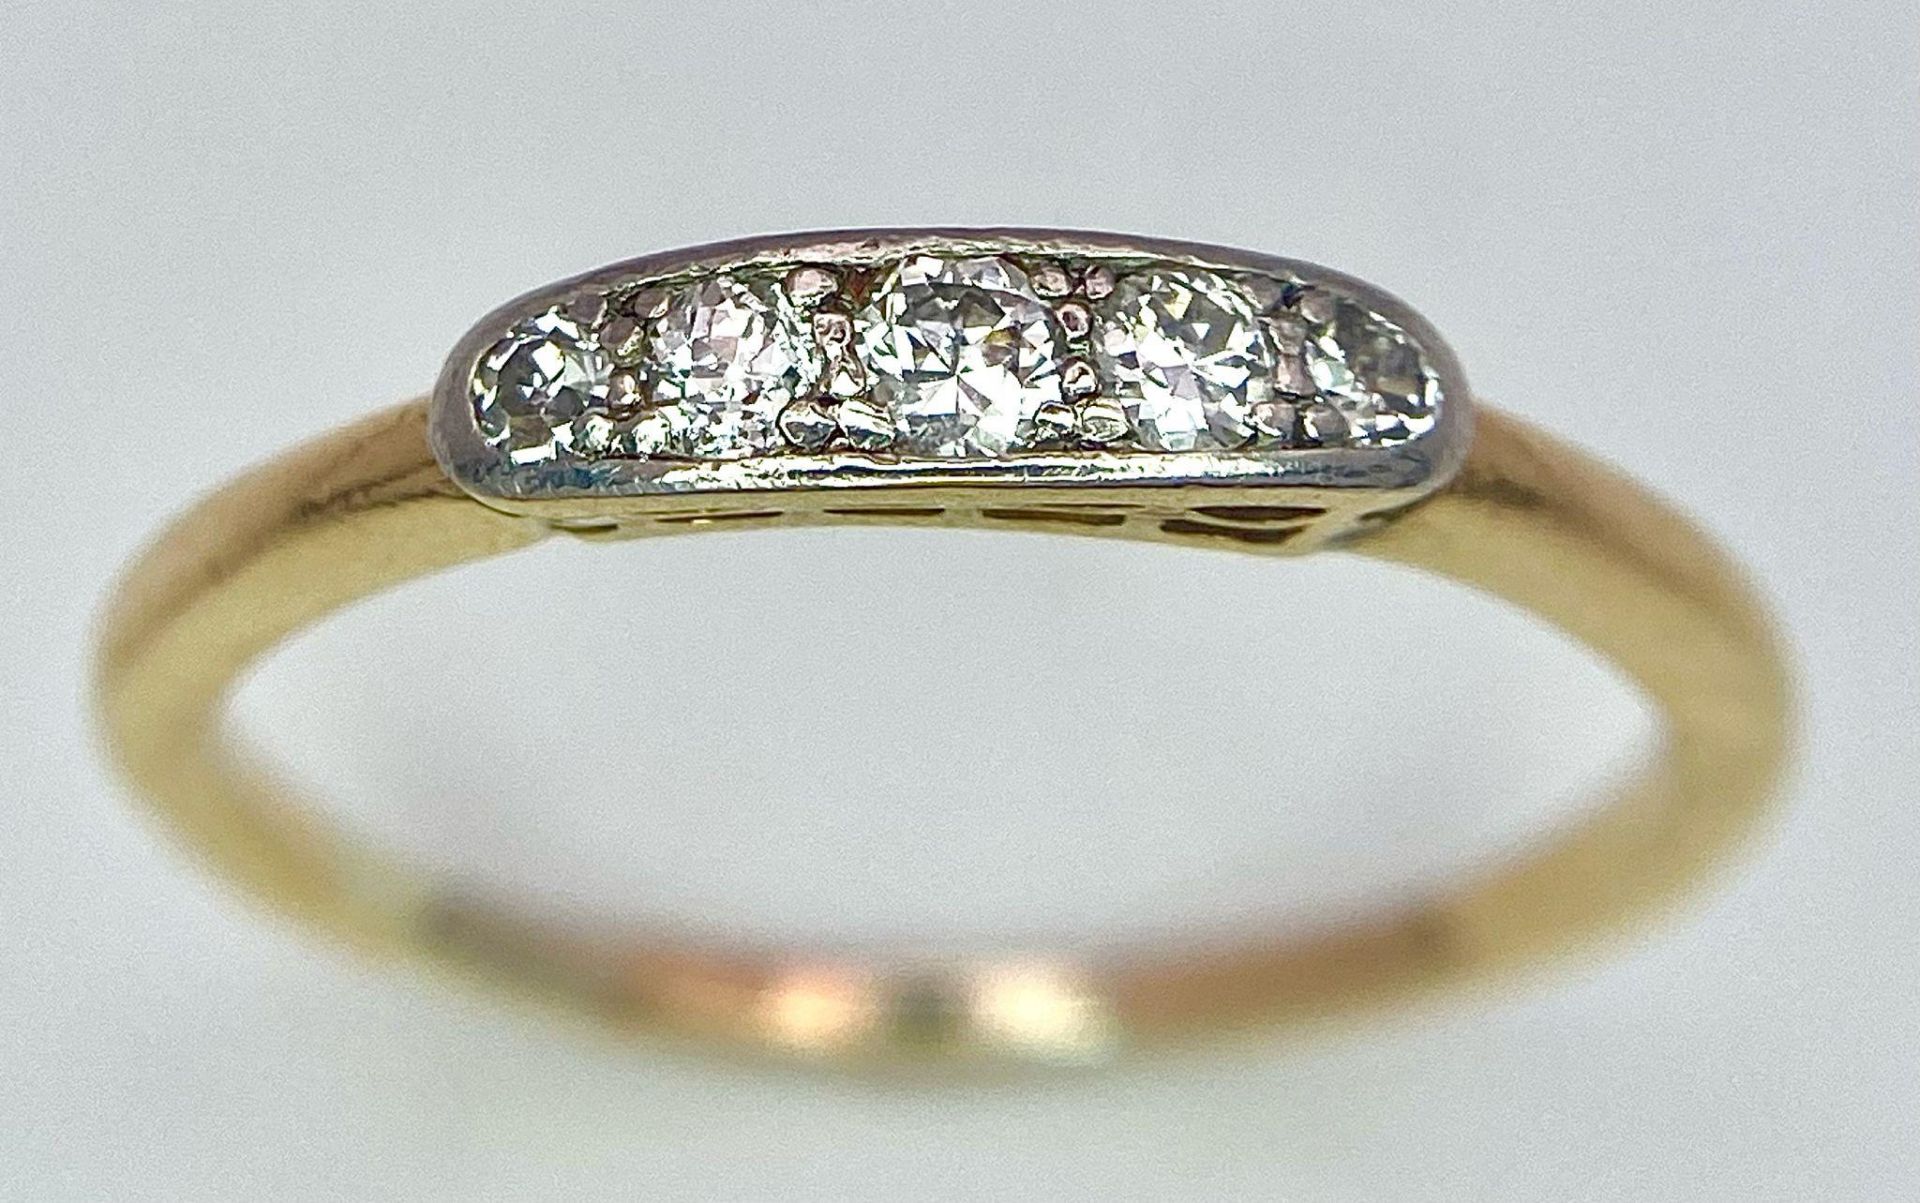 An 18K Yellow Gold and Platinum Vintage 5 Stone Diamond Ring. Size R, 2.2g total weight. Ref: 8502 - Image 3 of 9